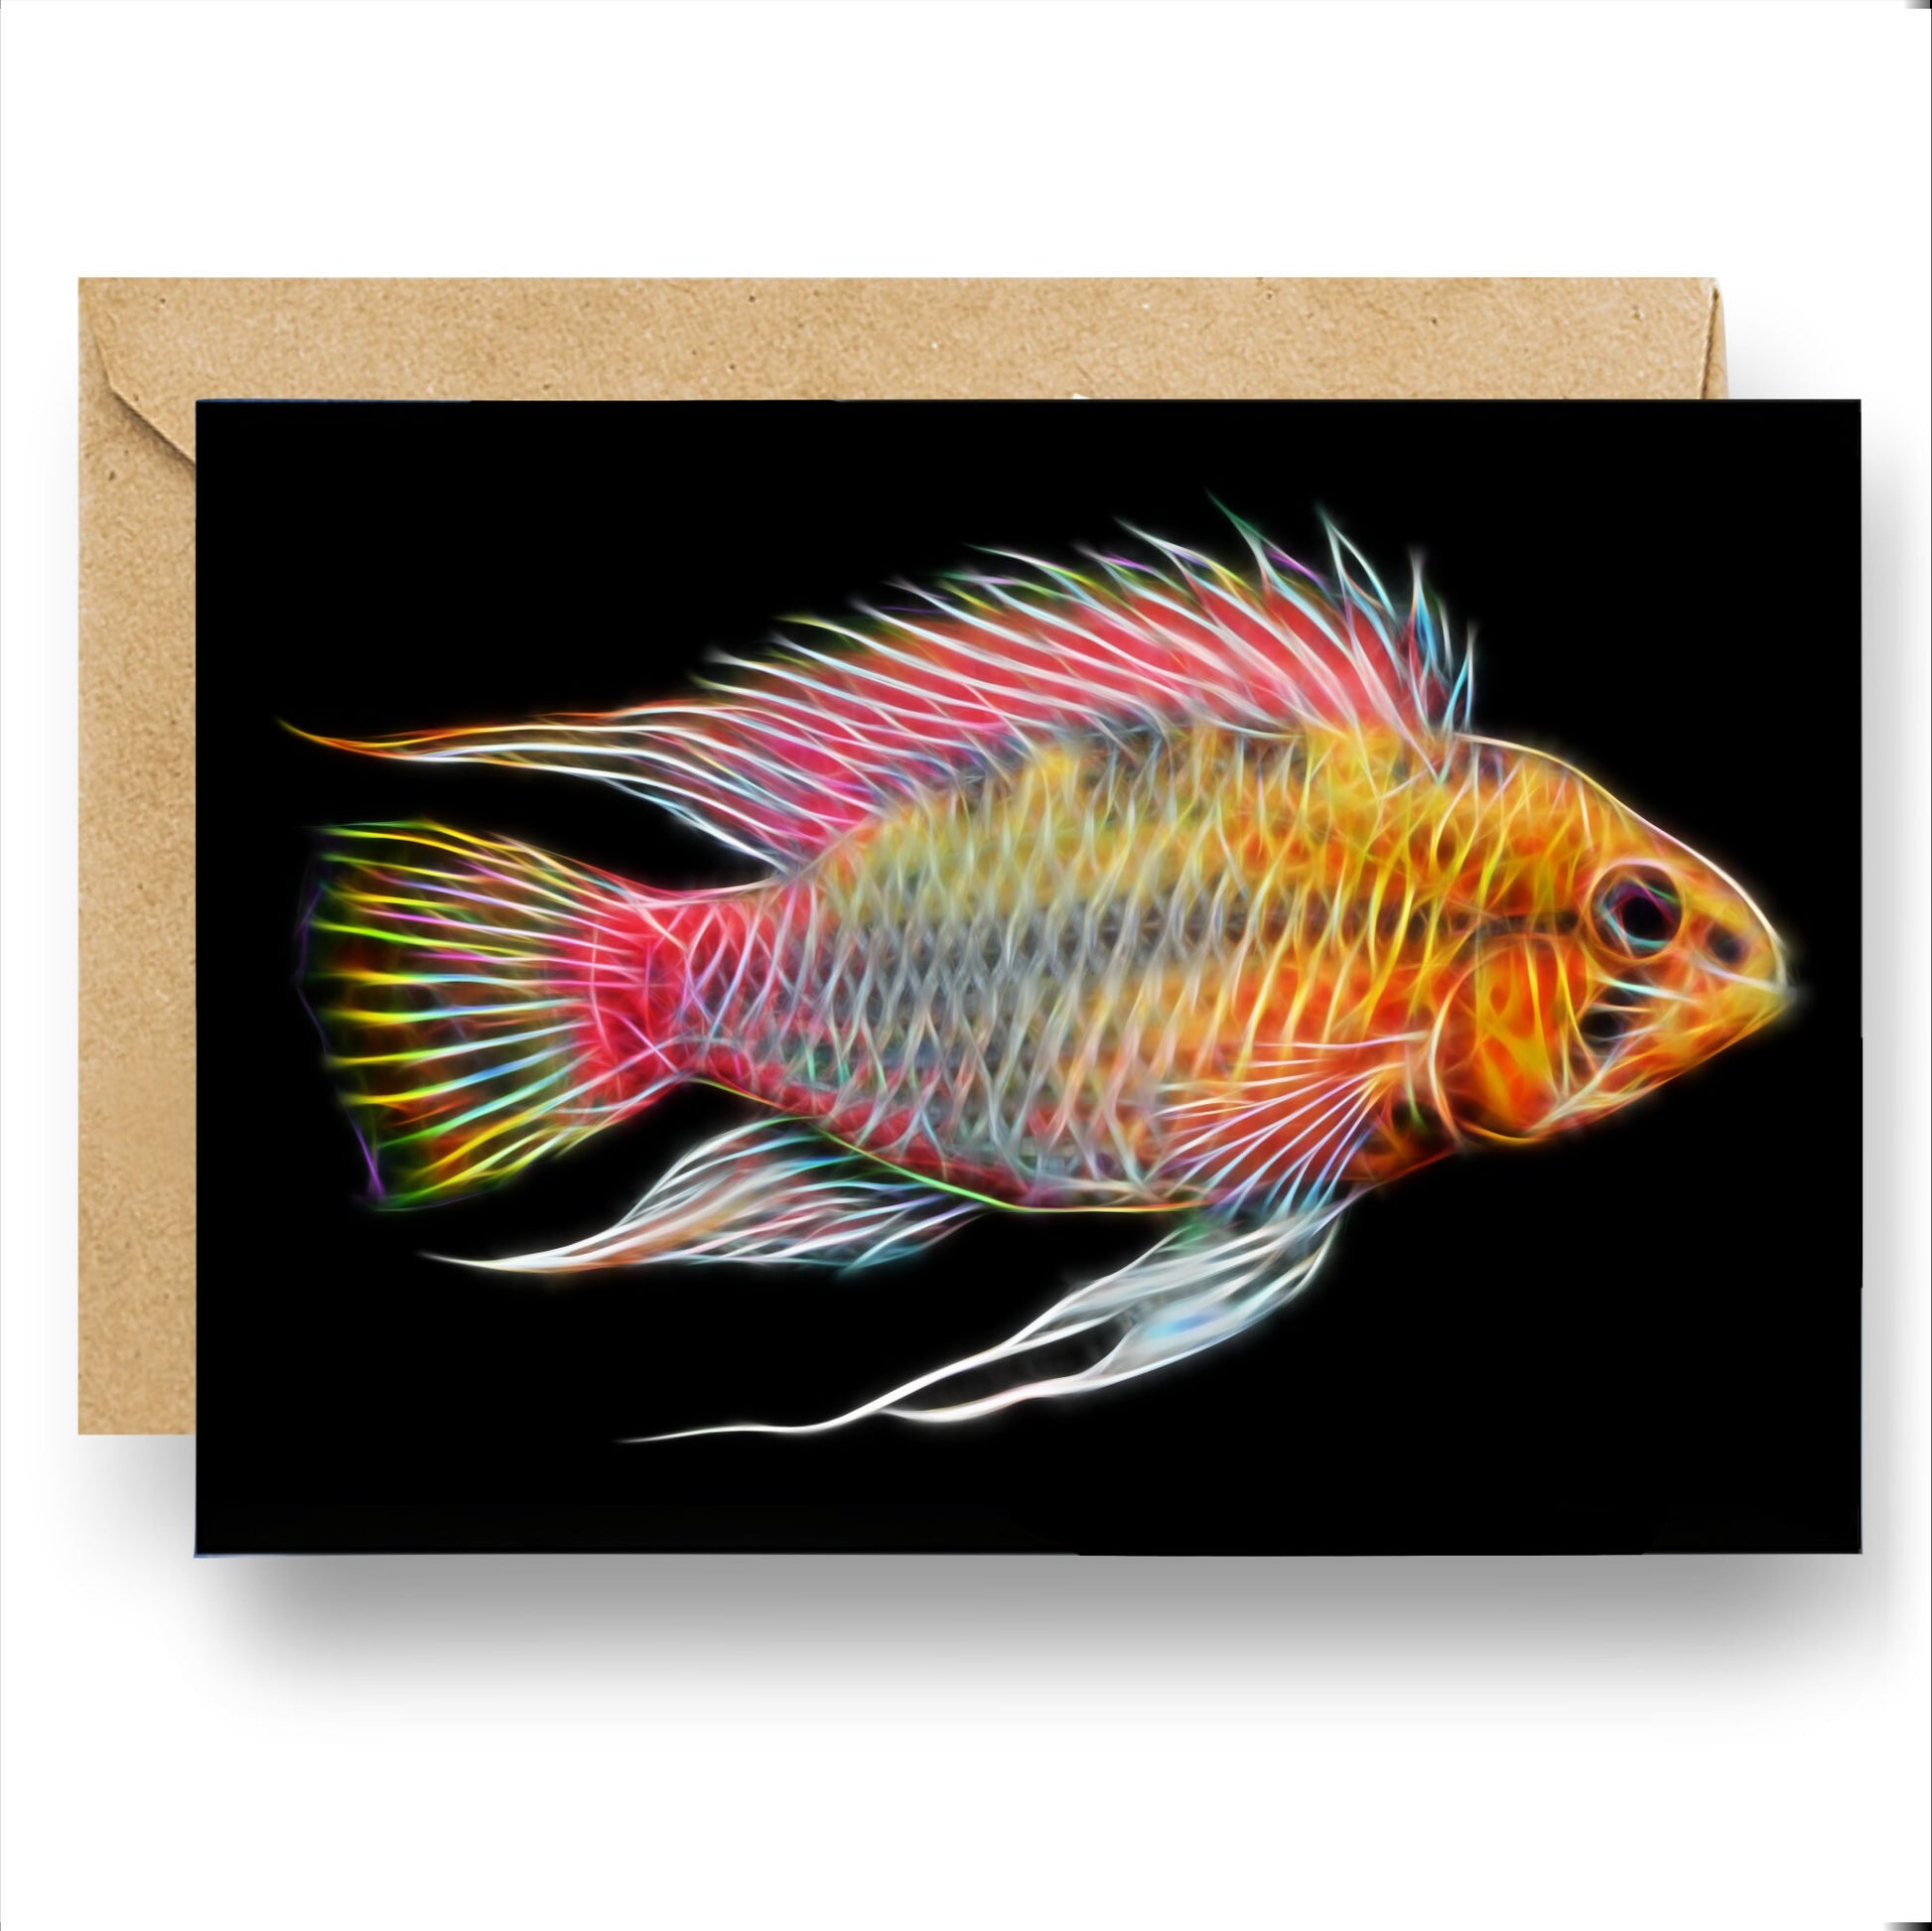 Apistogramma Cichlid Fish Greeting Card with Stunning Fractal Art Design (Blank Inside). A Selection of Designs.